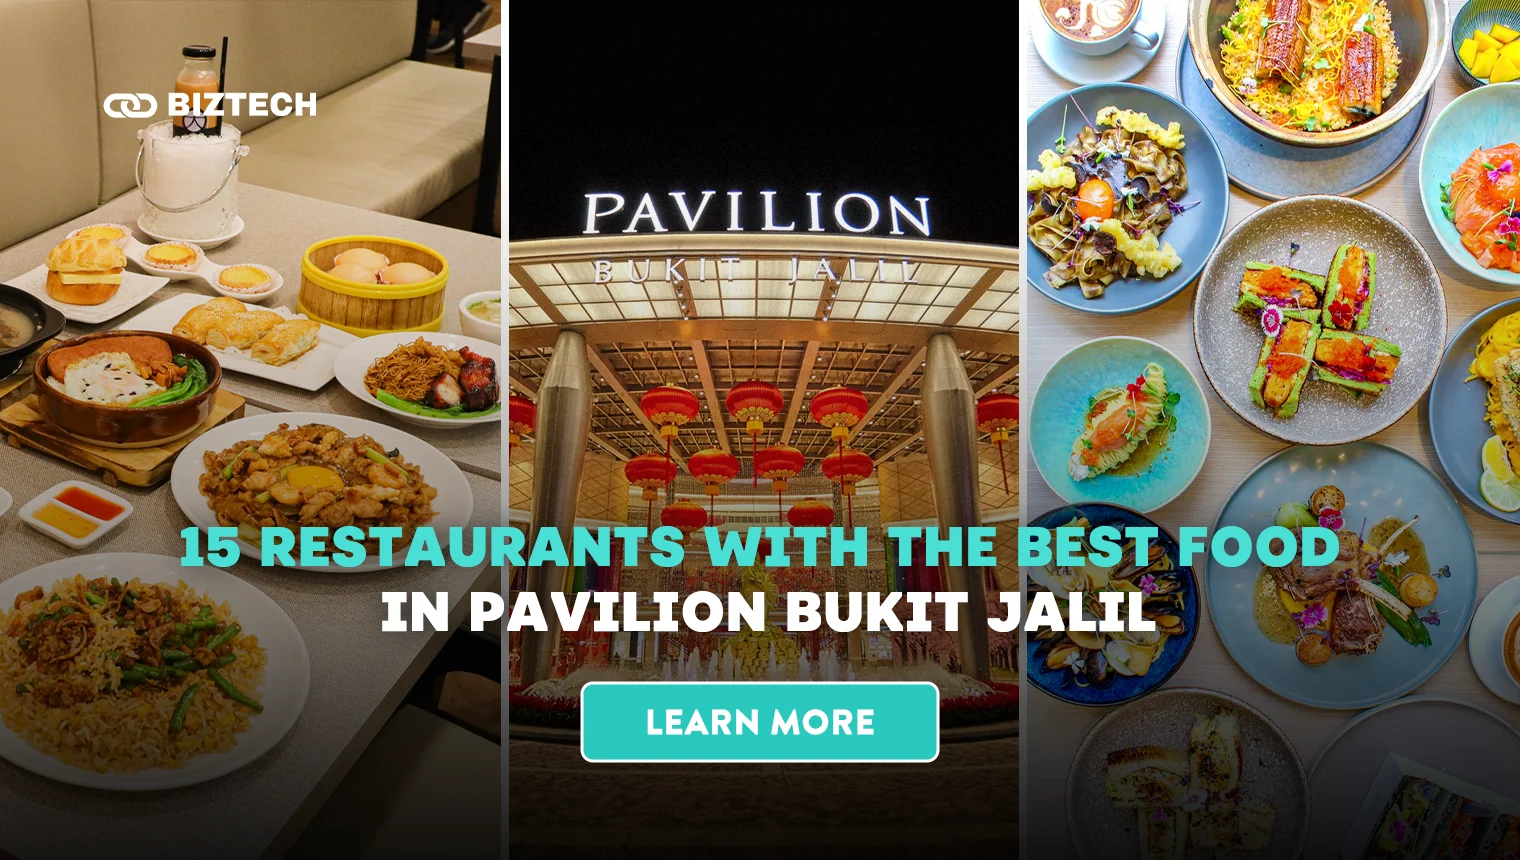 15 Restaurants with The Best Food in Pavilion Bukit Jalil